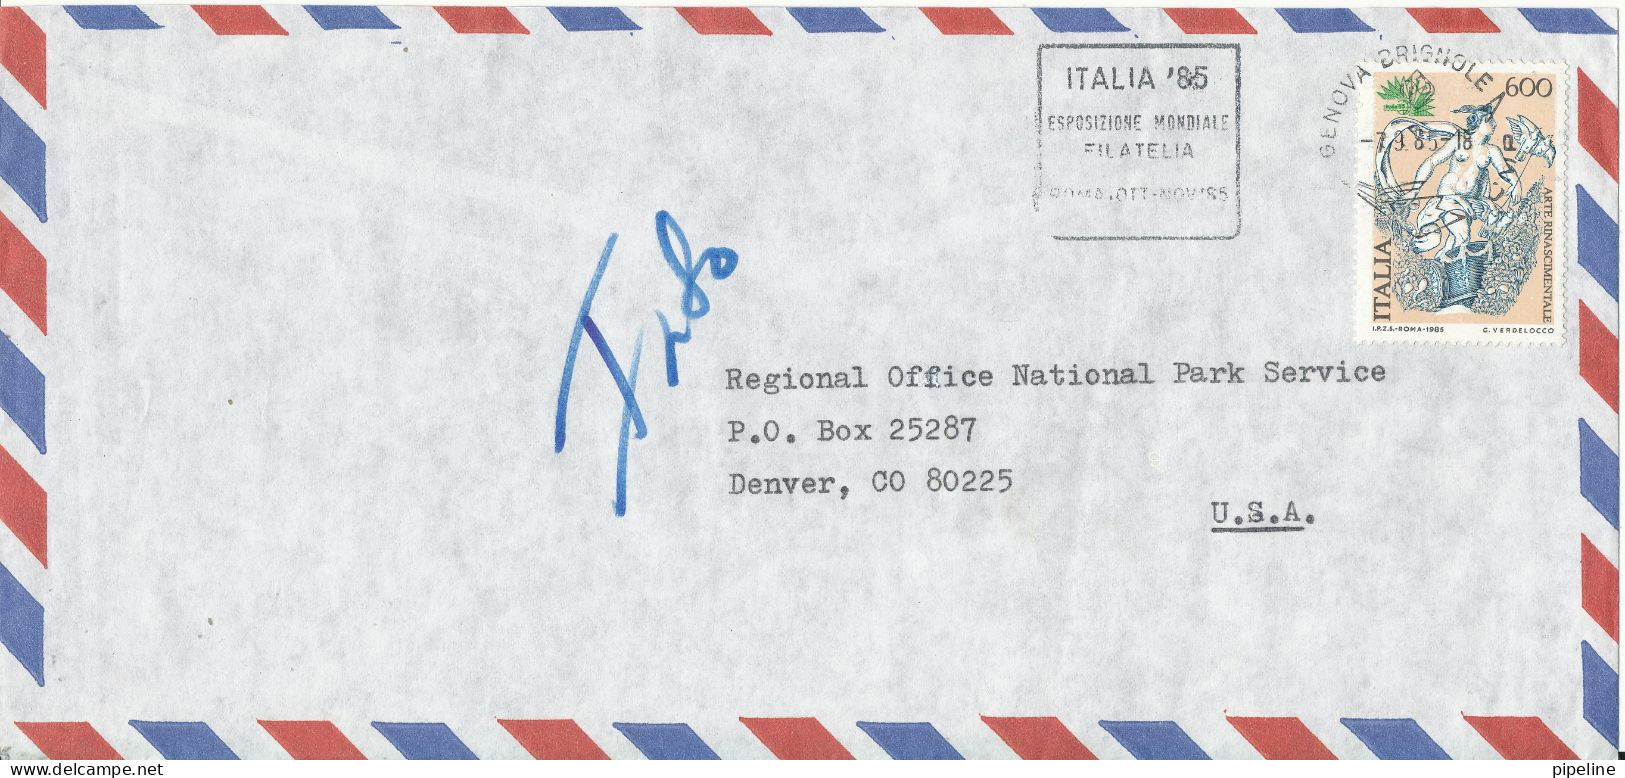 Italy Air Mail Cover Sent To USA 7-9-1985 Single Franked - Luftpost